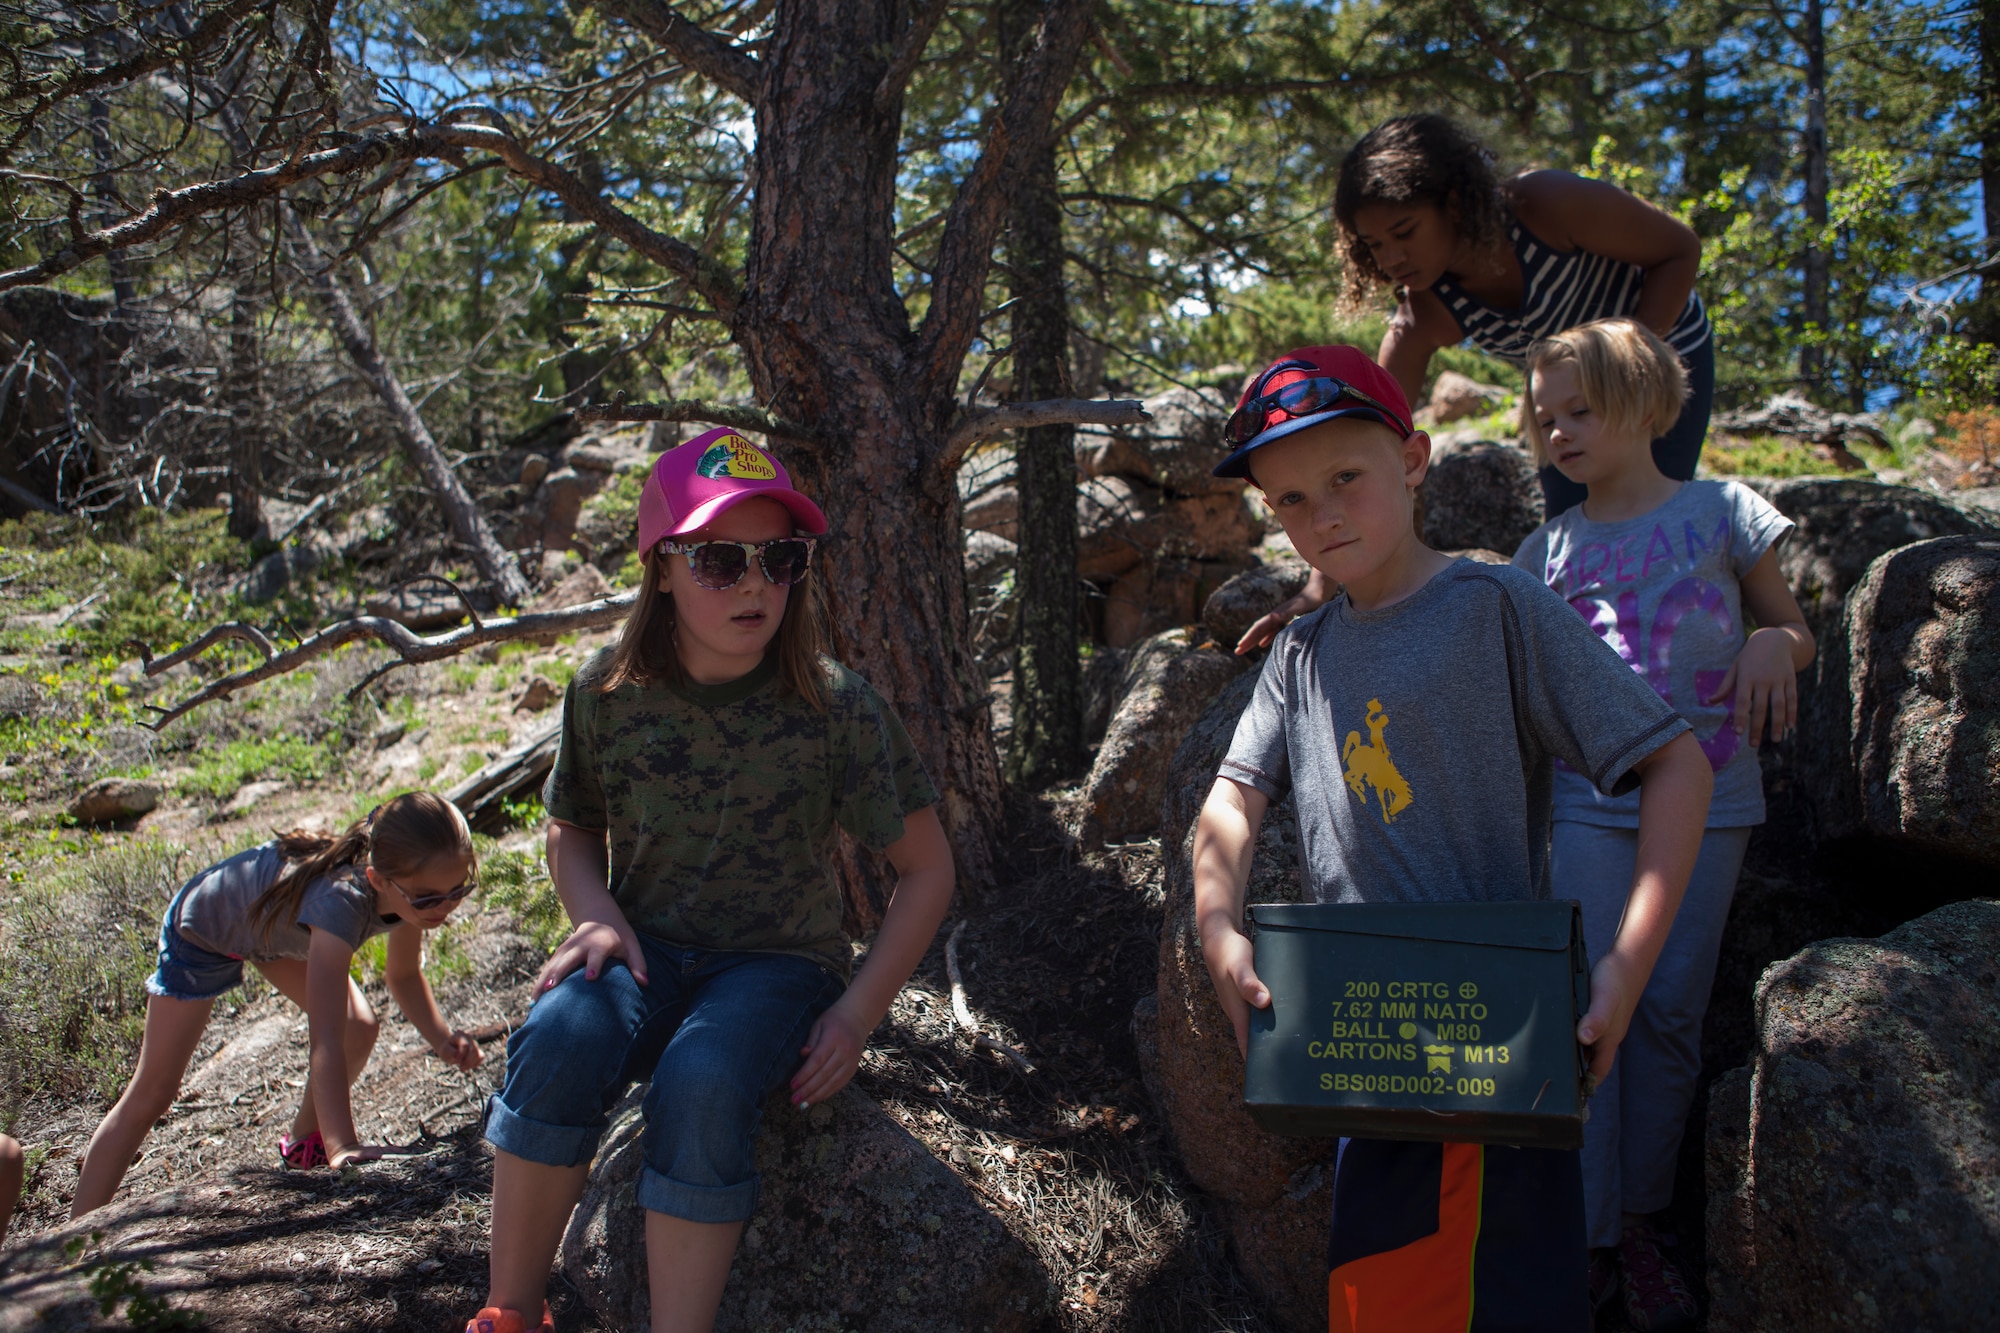 Race Morrell, 7, son of Allison Morrell, 90th Medical Operations Squadron, holds a Geocache container found in the Vedauwoo Recreation Area of the Medicine Bow National Forest, Wyo., June 8, 2015. The children participating in Basic Recreational Adventure Training Camp were geocaching, which is an activity where participants use a GPS device to locate containers called "geocaches" located anywhere in the world. (U.S. Air Force photo by Lan Kim)